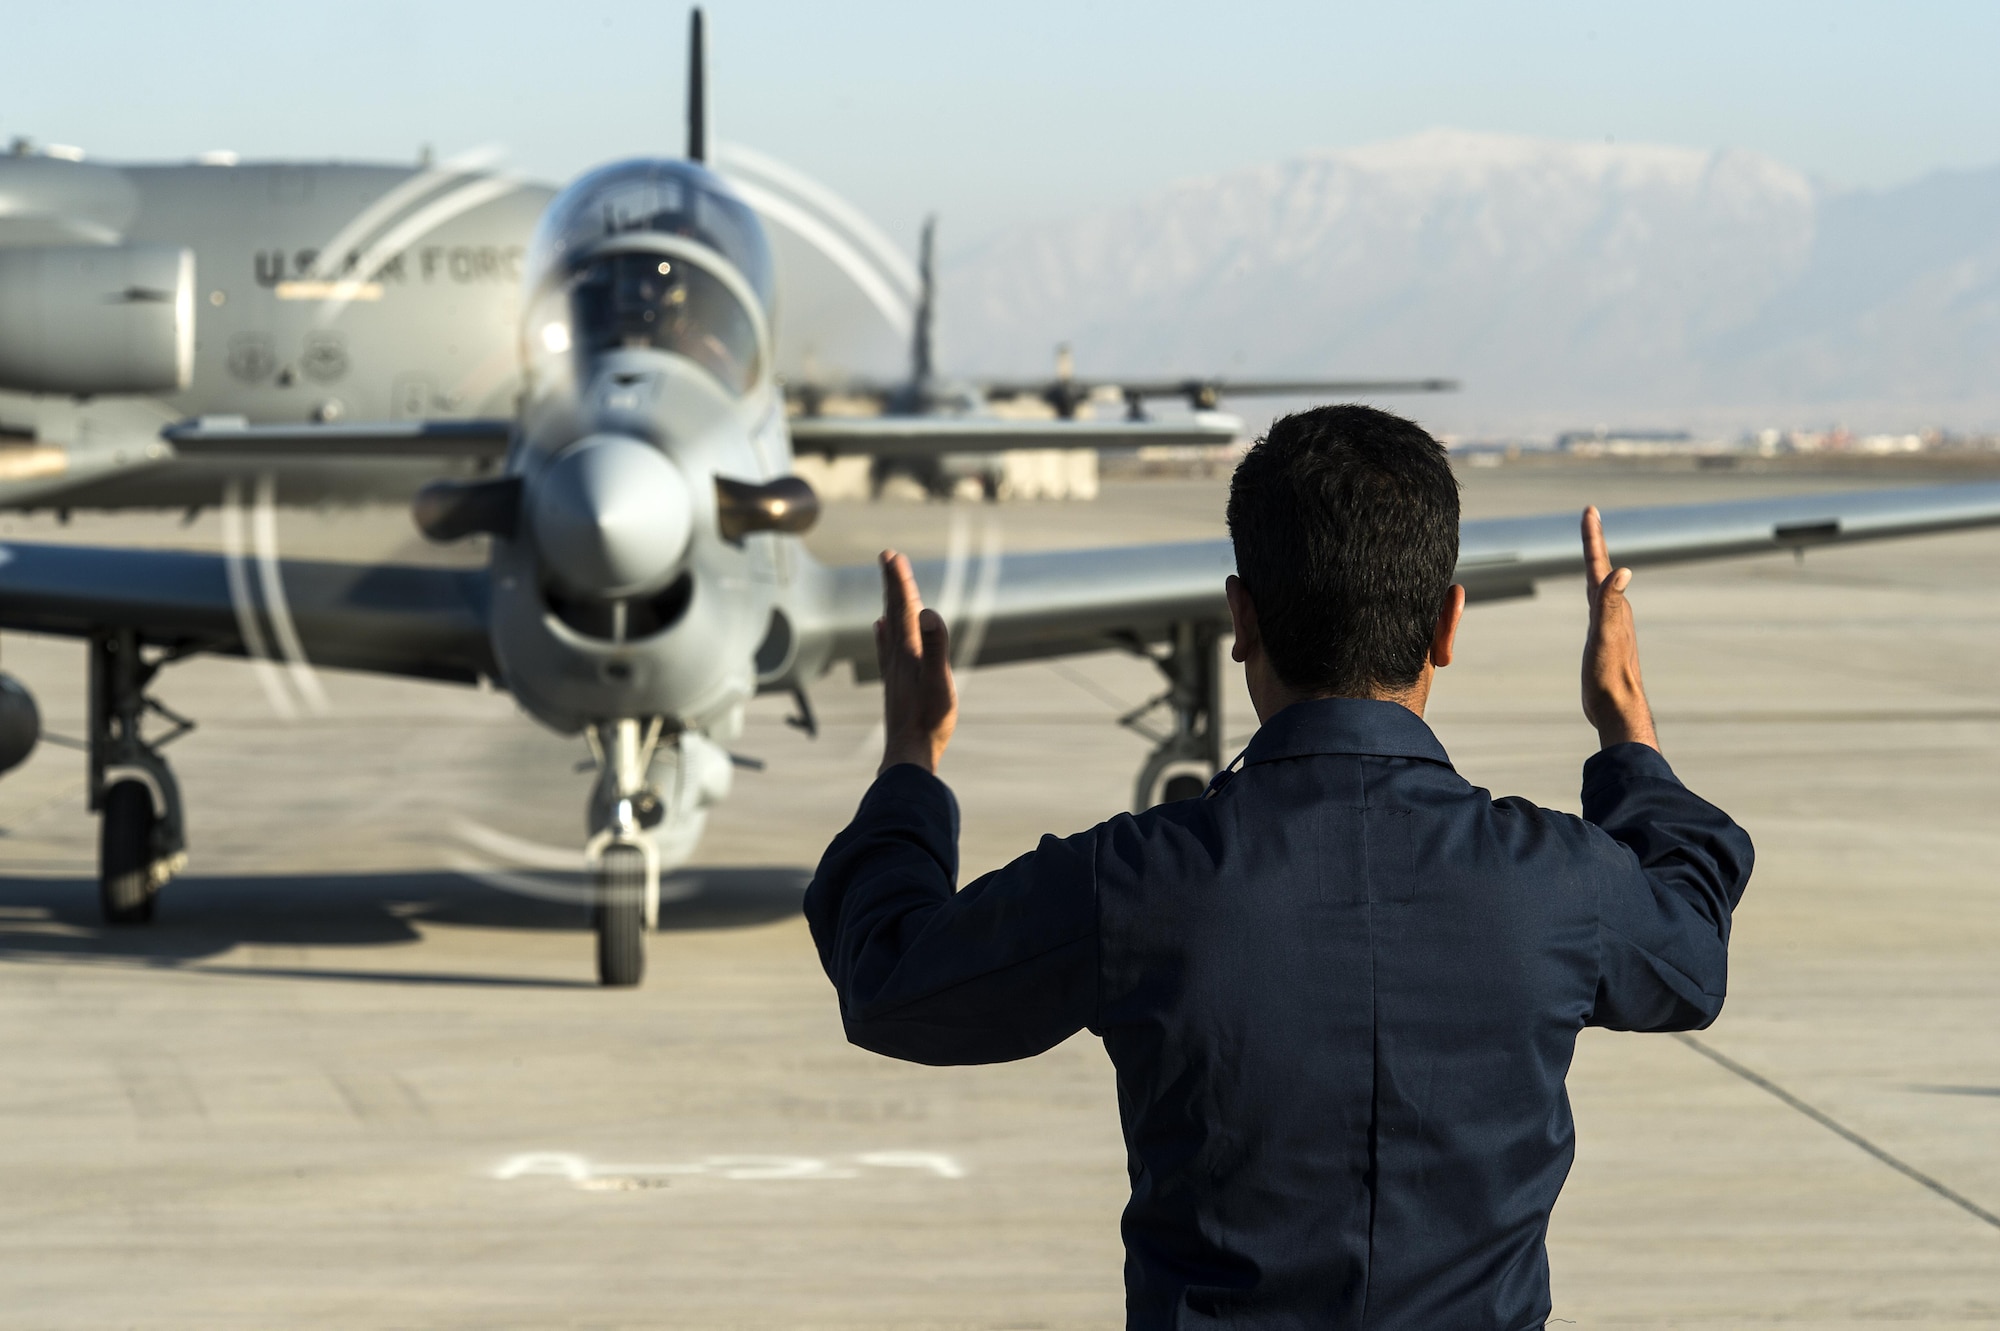 A member of the Afghan air force marshals in an A-29 Super Tucano at Hamid Karzai International Airport, Afghanistan, Jan. 15, 2016. The aircraft will be added to the Afghans' inventory in the spring of 2016. The A-29 Super Tucano is a 'light air support' aircraft capable of conducting close air support, aerial escort, armed overwatch and aerial interdiction. Designed to operate in high temperature and in extremely rugged terrain, the A-29 Super Tucano is highly maneuverable 4th generation weapons system capable of delivering precision guided munitions. It can fly at low speeds and low altitudes, is easy to fly, and provides exceptionally accurate weapons delivery. It is currently in service with 10 different air forces around the world. (U.S. Air Force photo by Tech. Sgt. Nathan Lipscomb)